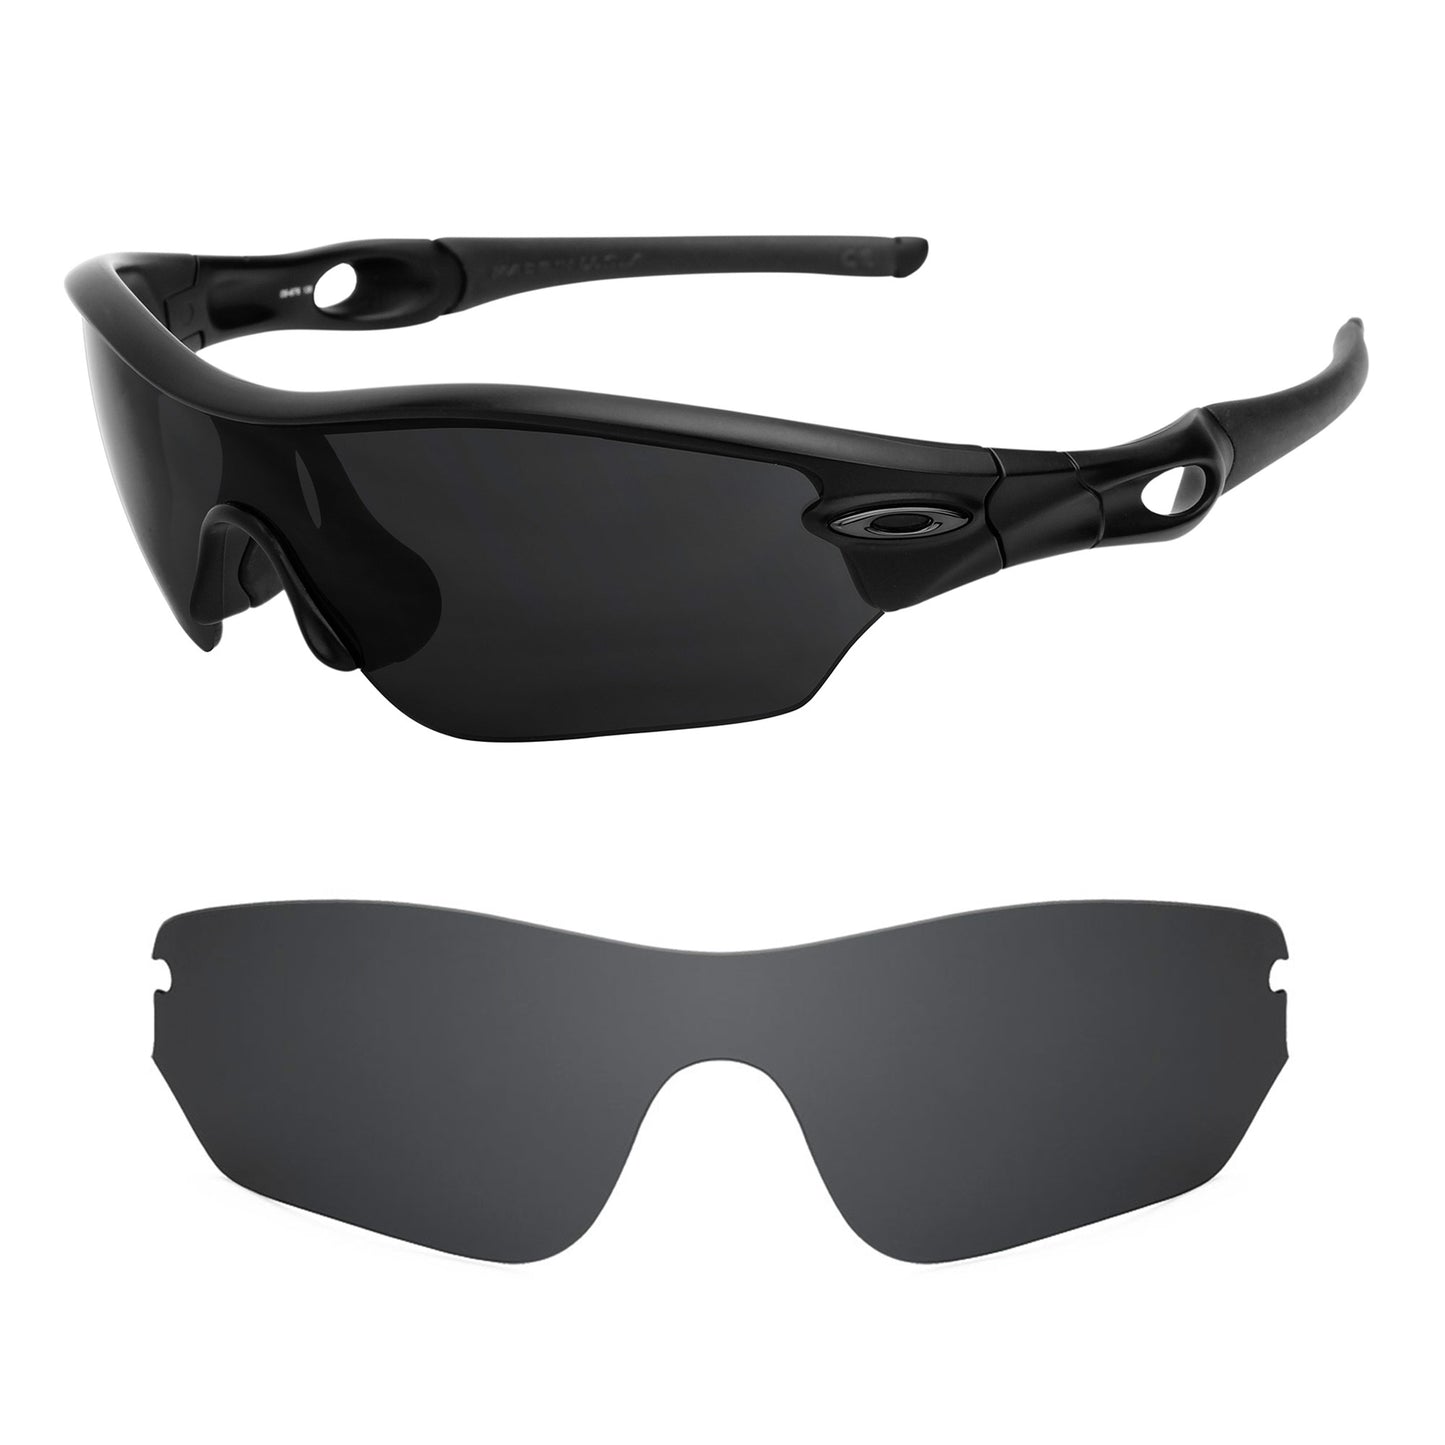 Oakley Radar Edge sunglasses with replacement lenses